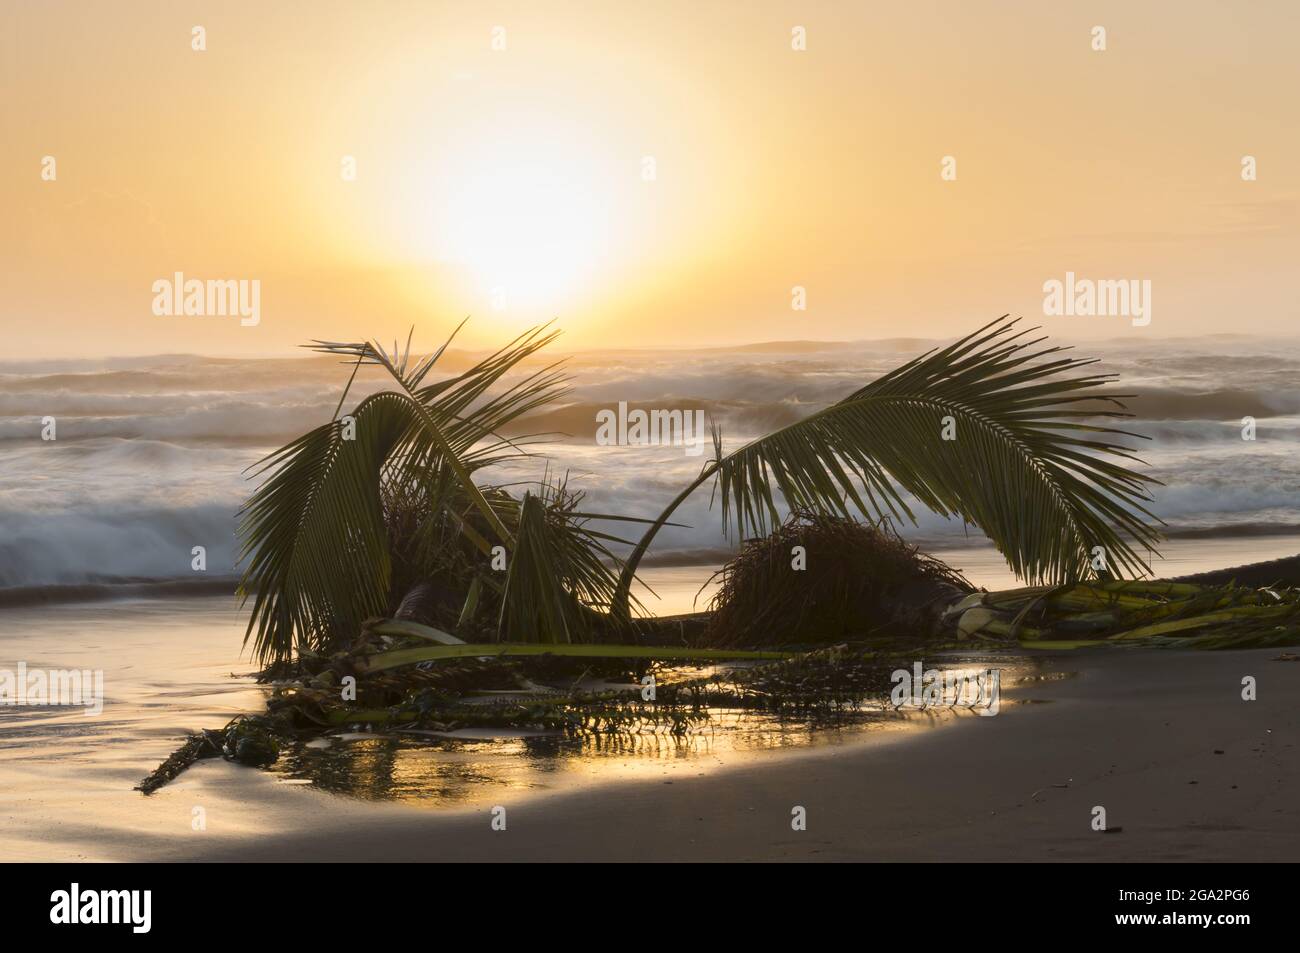 Sunrise over the Caribbean Sea on Costa Rica's eastern coastline with palm fronds from a fallen palm tree (Arecaceae) lying on the beach Stock Photo